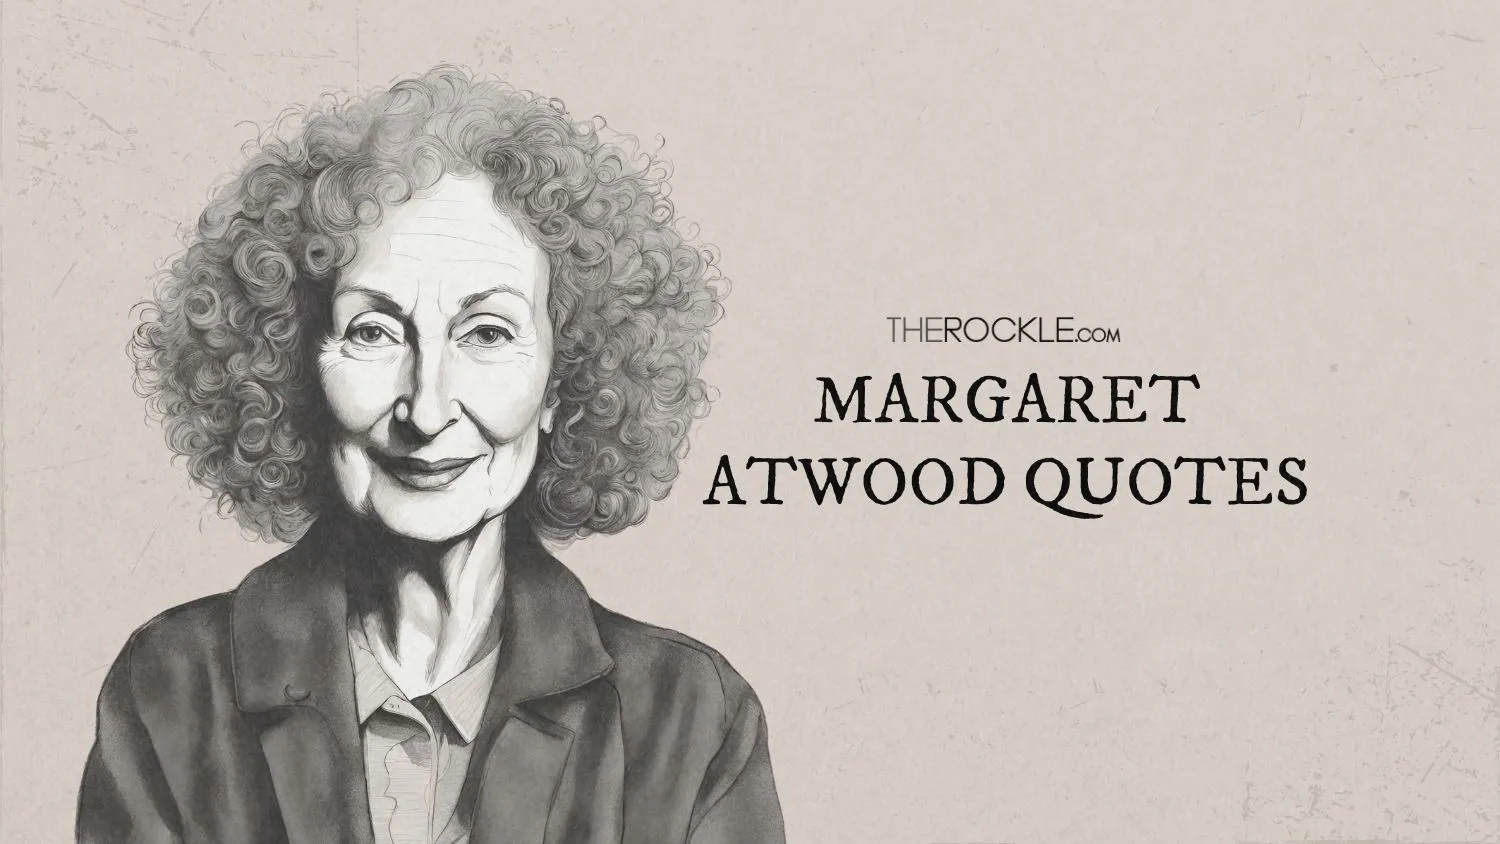 Drawing of Margaret Atwood